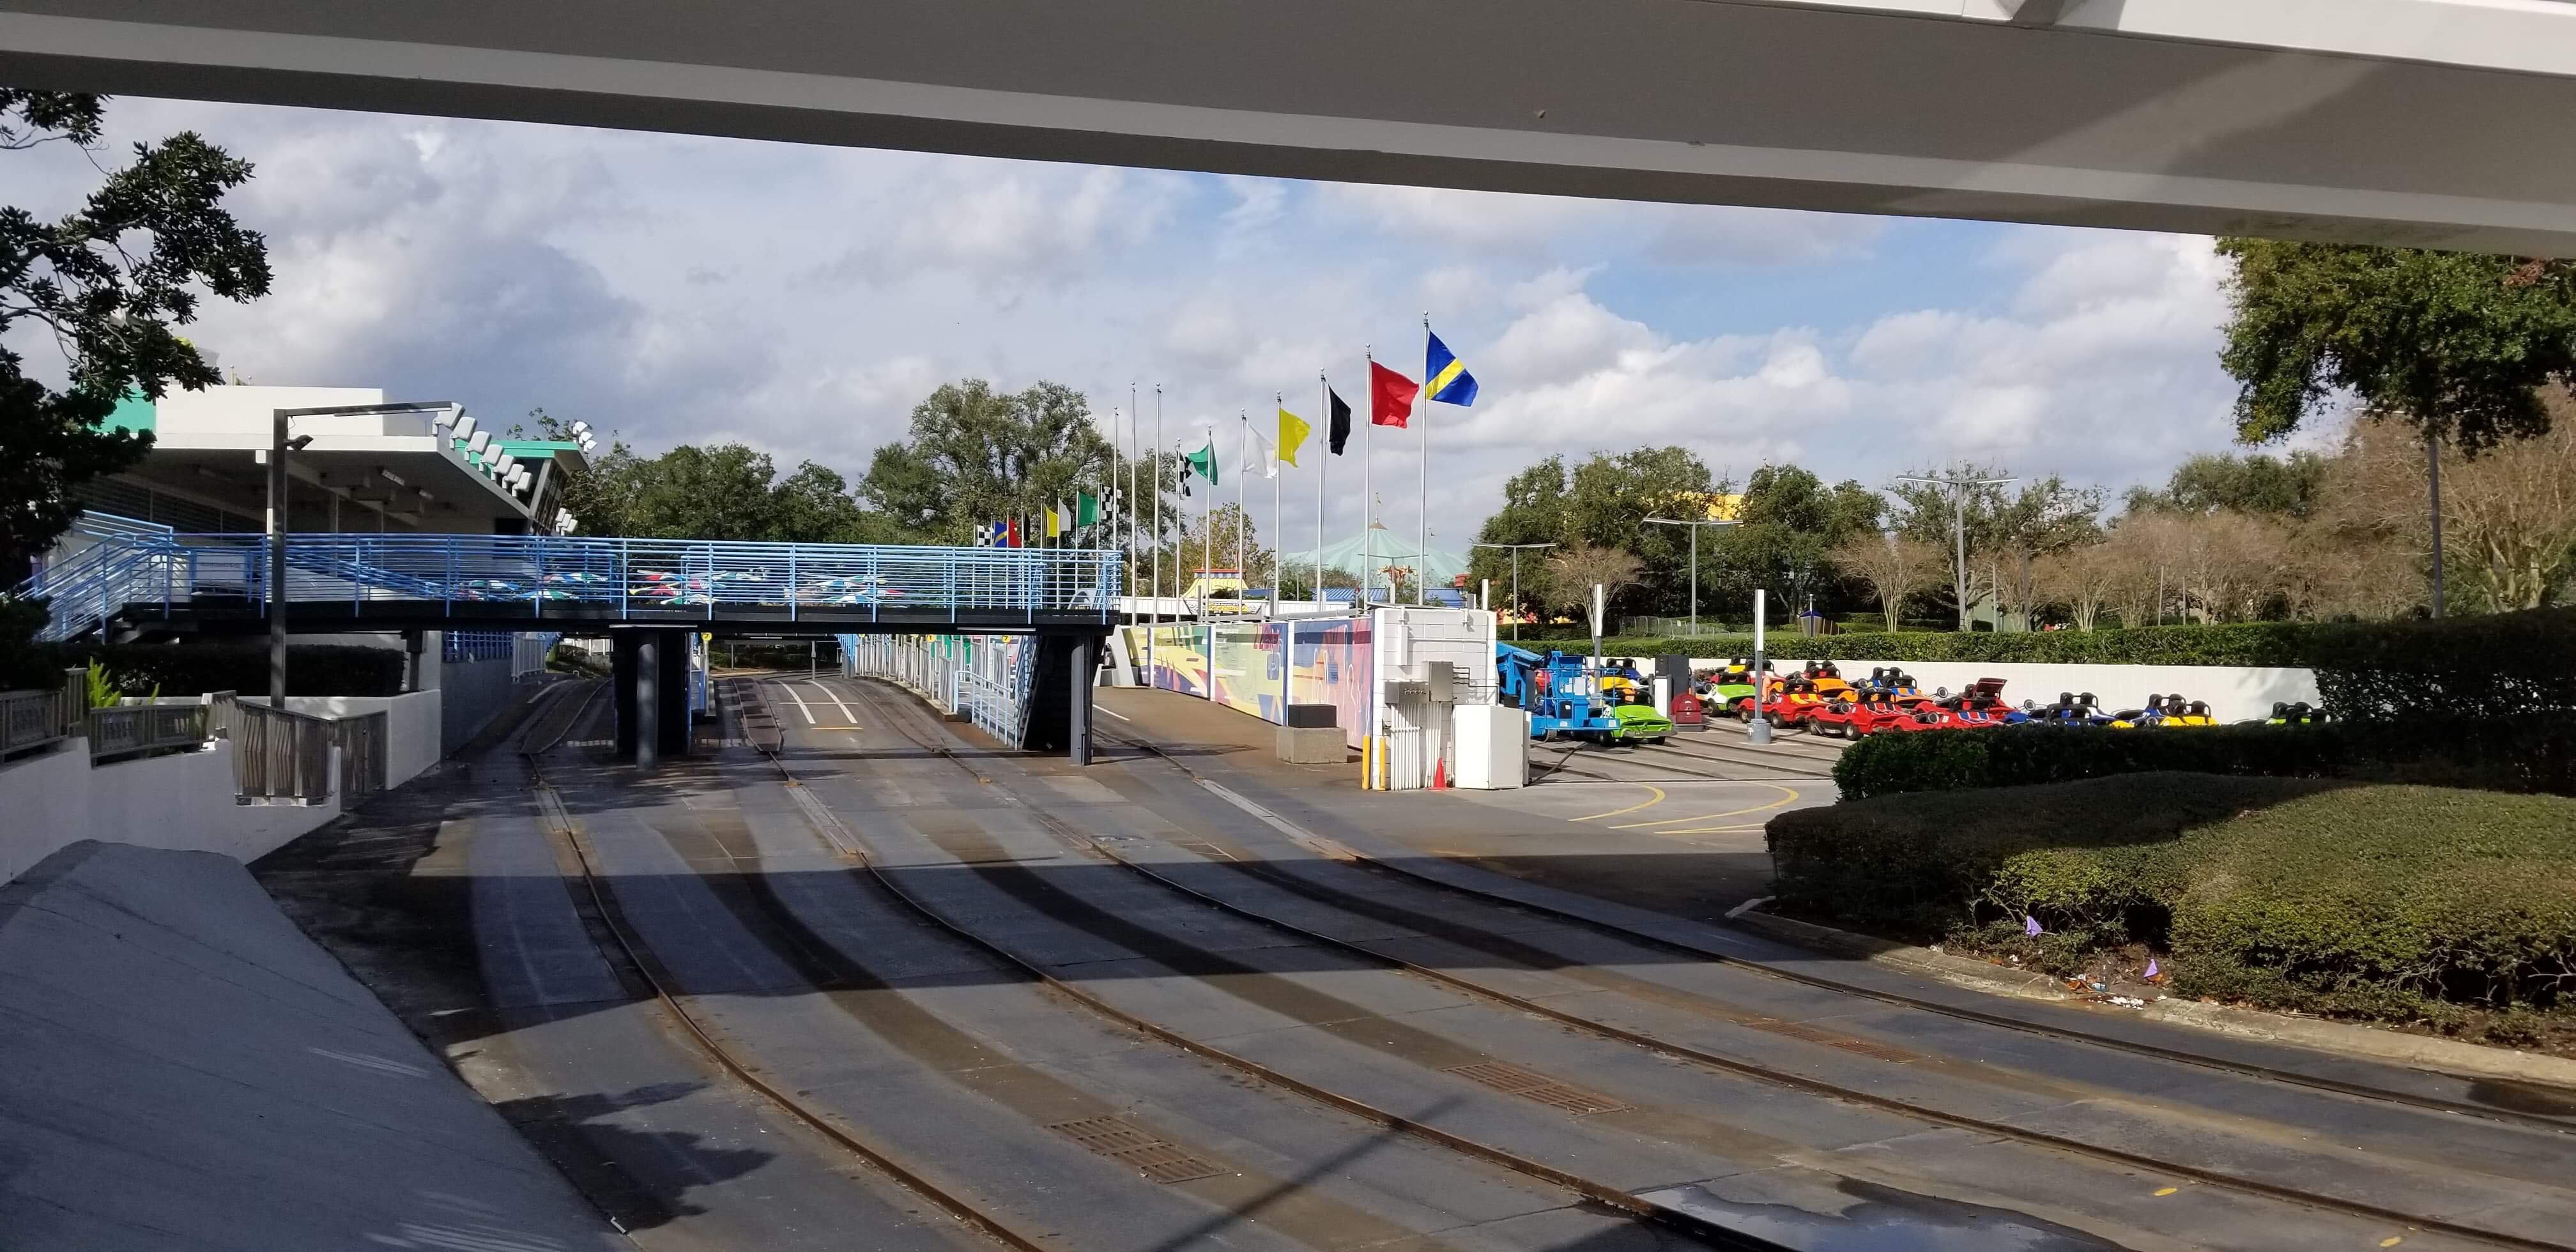 Tomorrowland Speedway is Temporarily Closed for Tron Construction